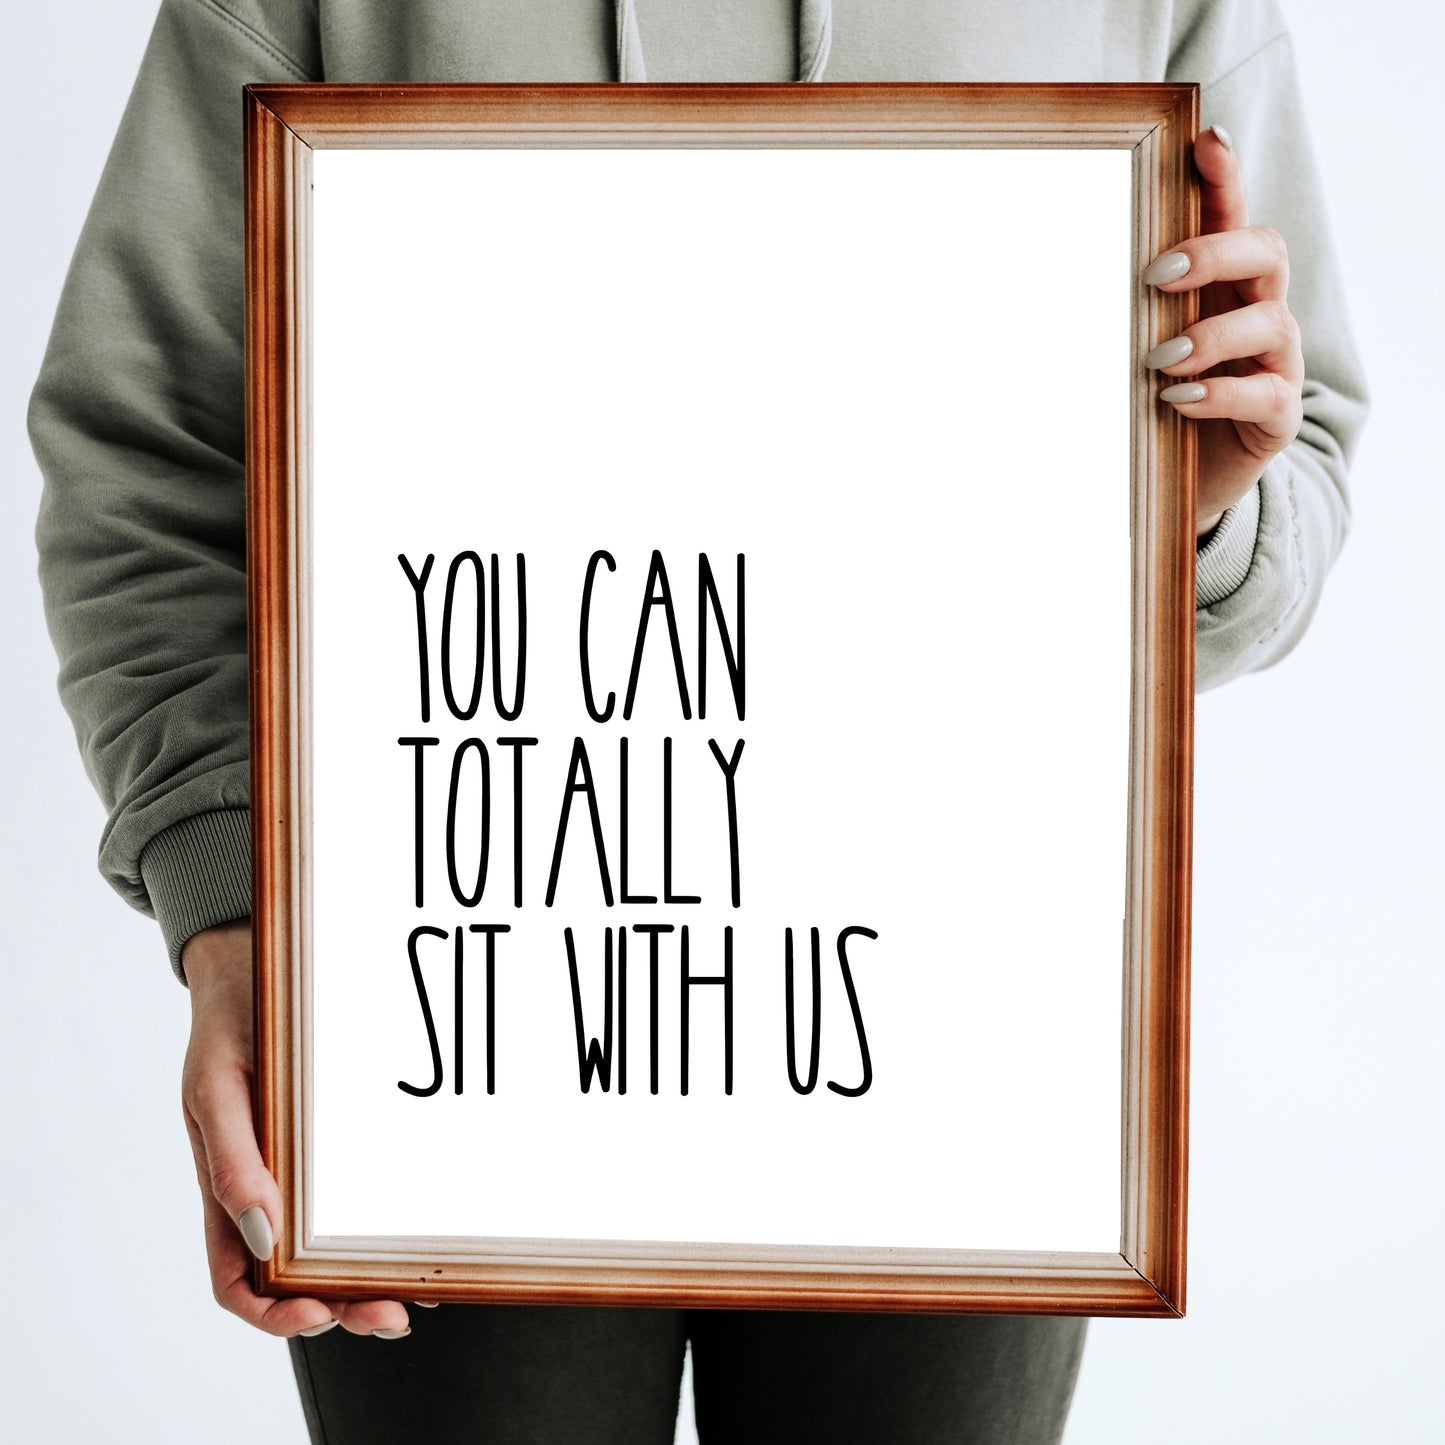 "You Can Totally Sit With Us" Rae Dunn Inspired, Movie Quote From 'Mean Girls,' Farmhouse Chic Printable Art